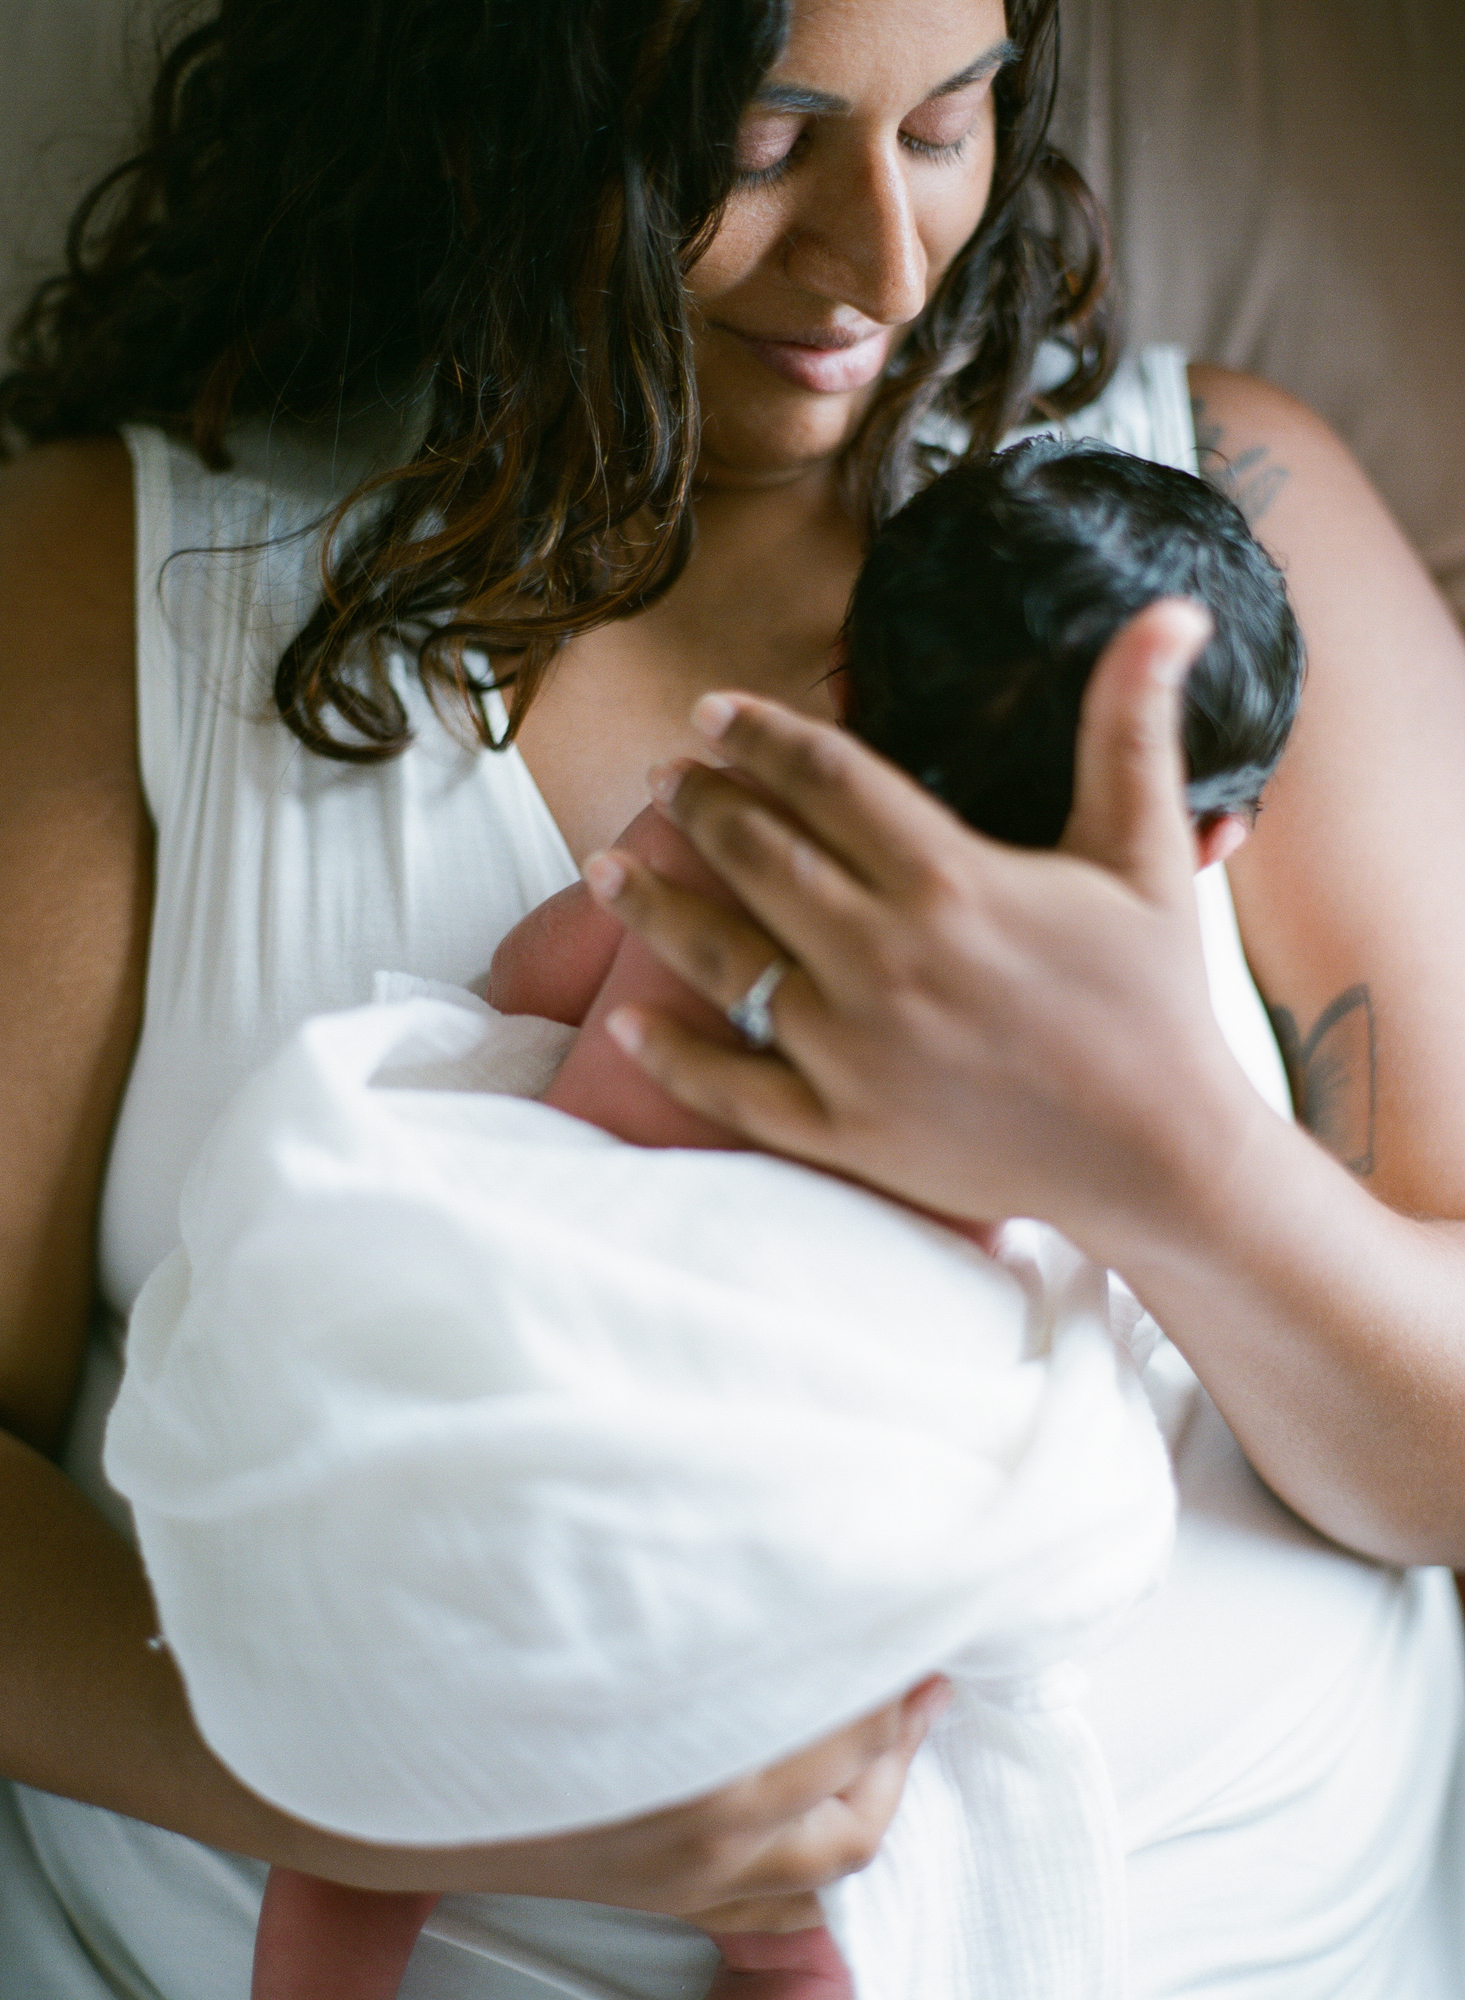 raleigh-lifestyle-newborn-photographer-home-session-002